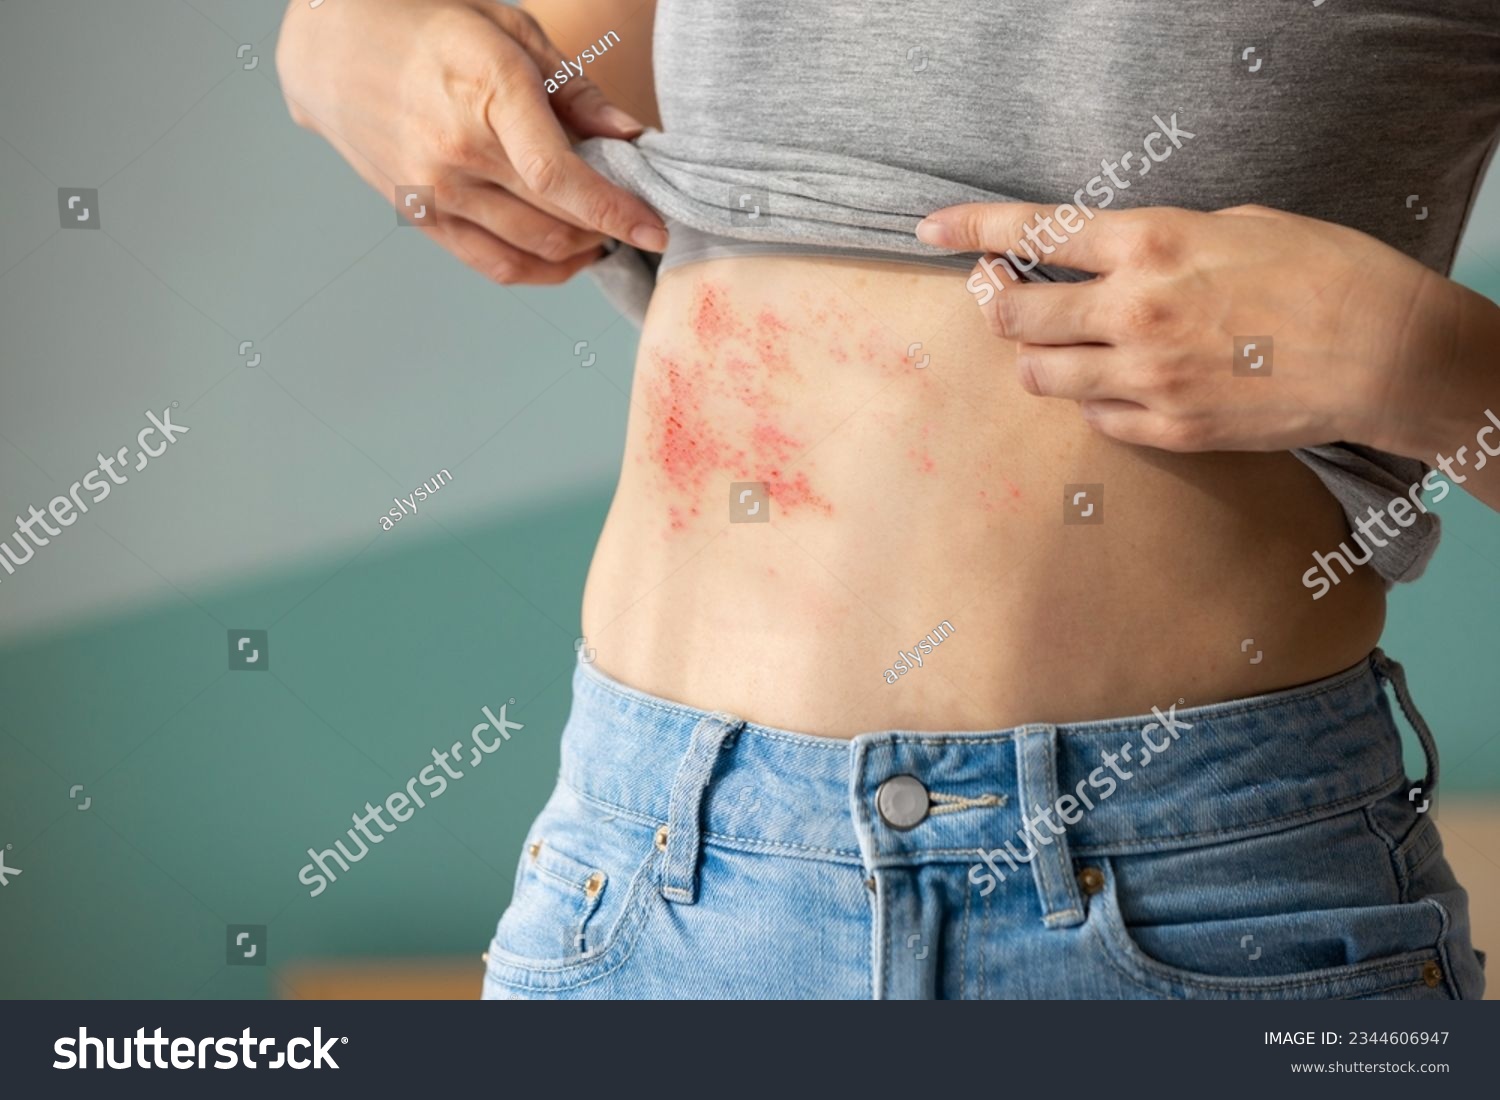 Woman with shingles on the skin she feels very painful #2344606947